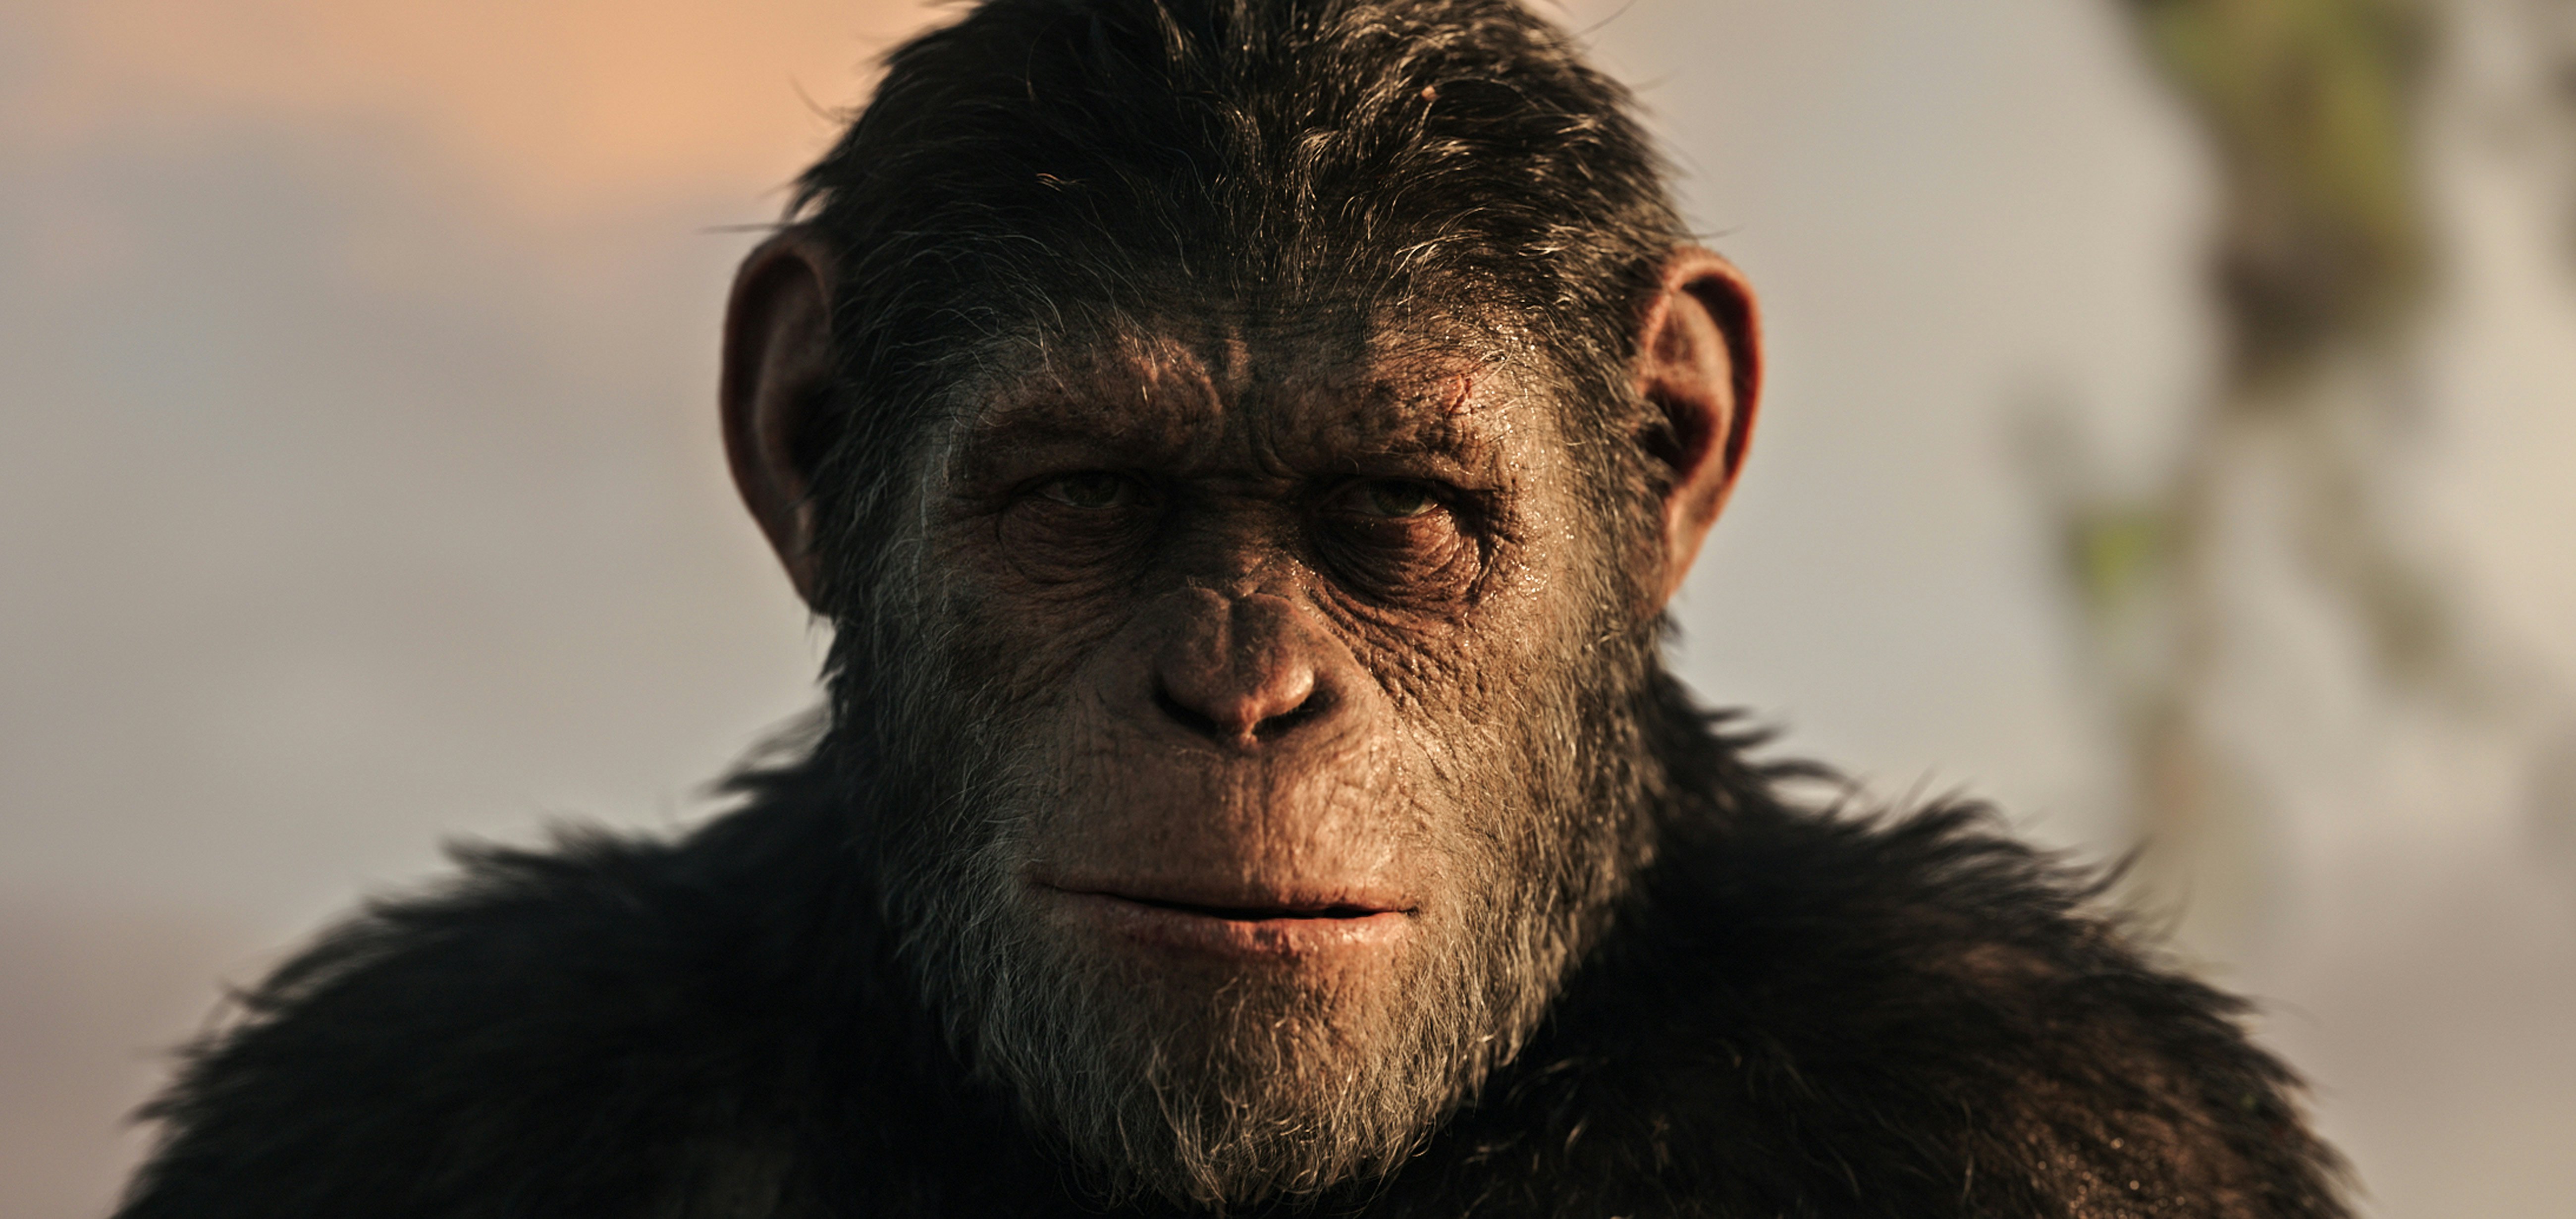 rise of the planet of the apes free movie